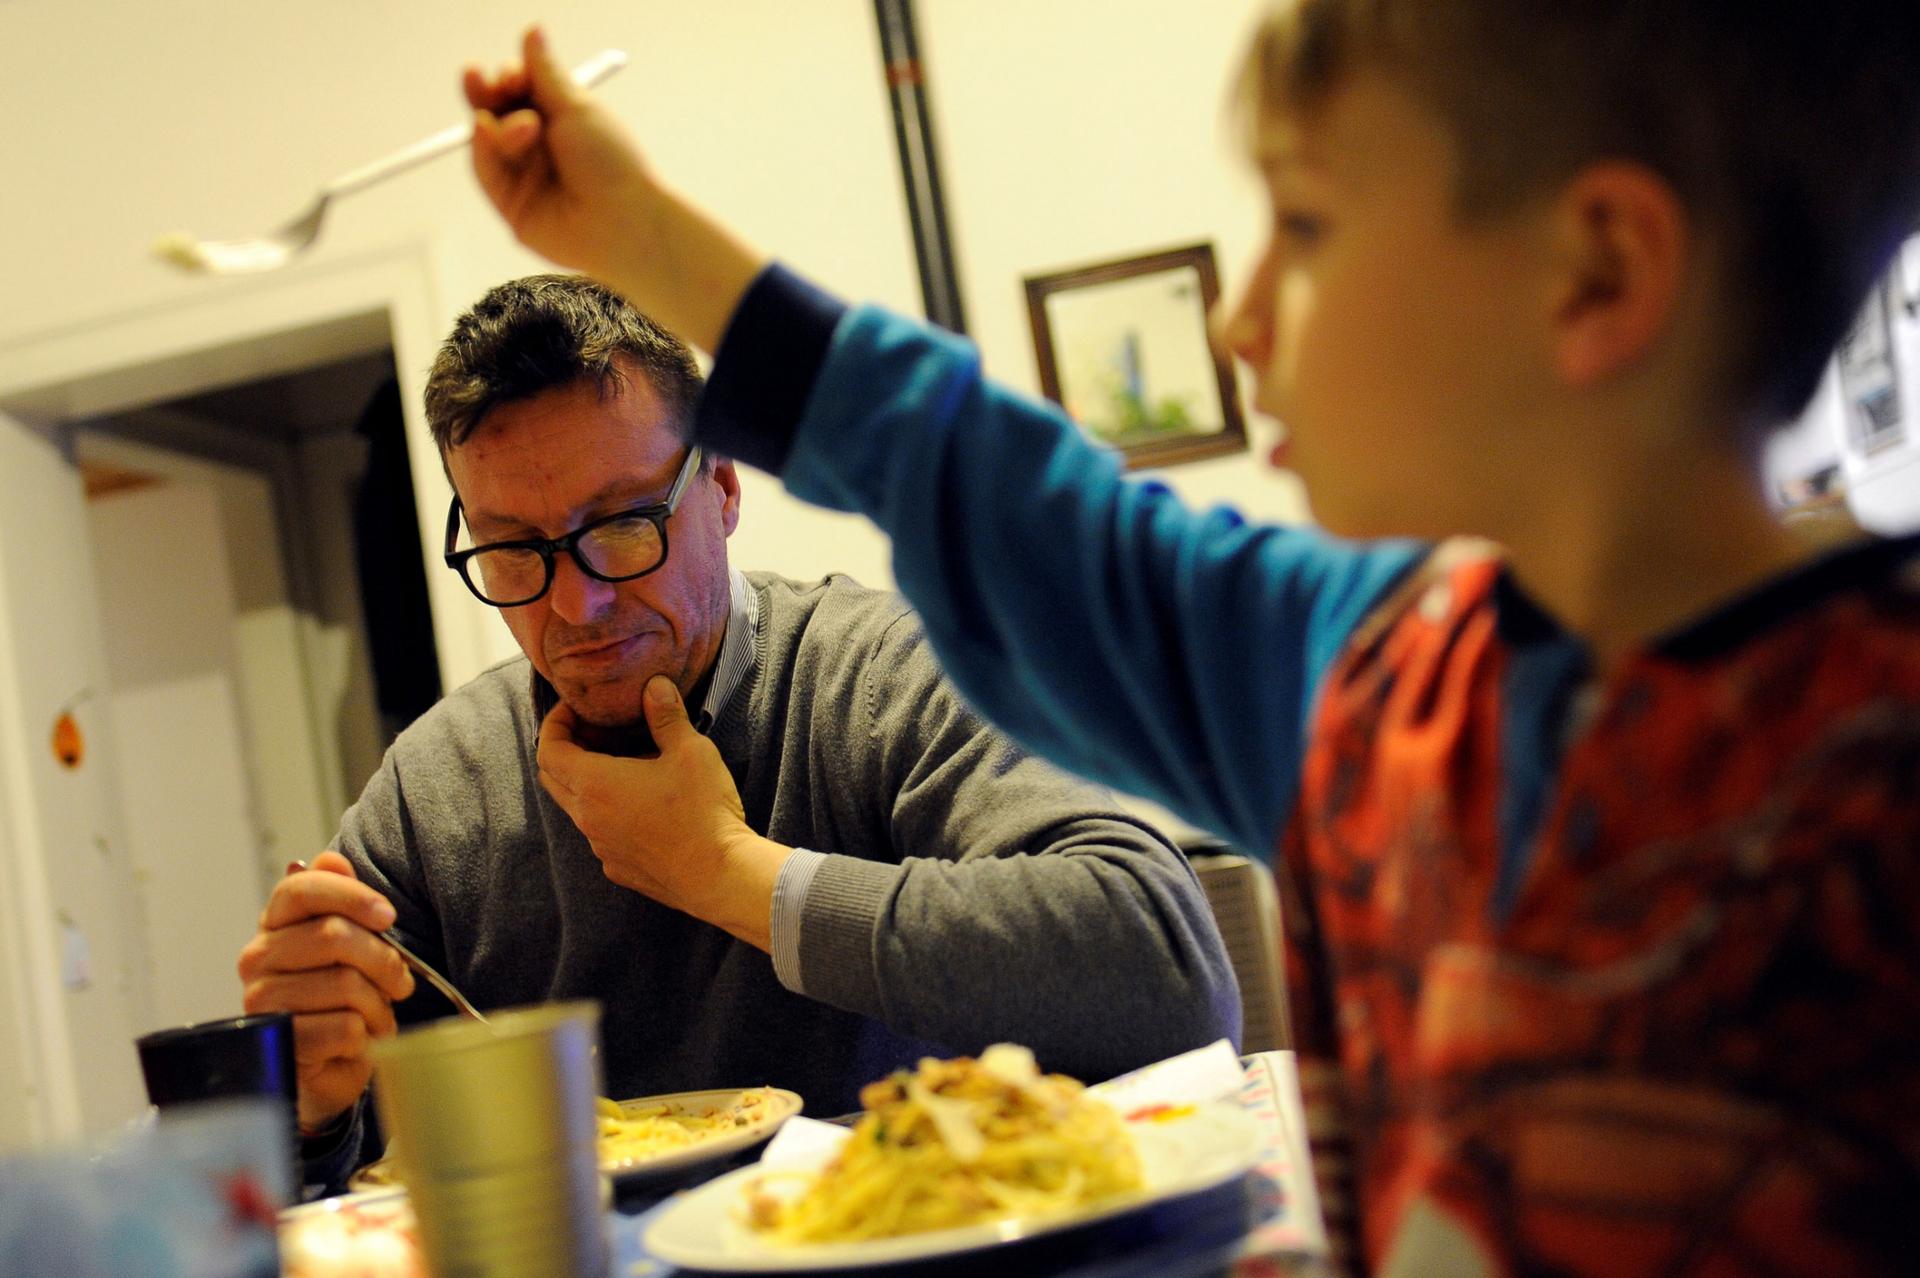 A young boy is shown in the nearground of the photo holding up a fork with his father sitting in the background eating from a plate of food.